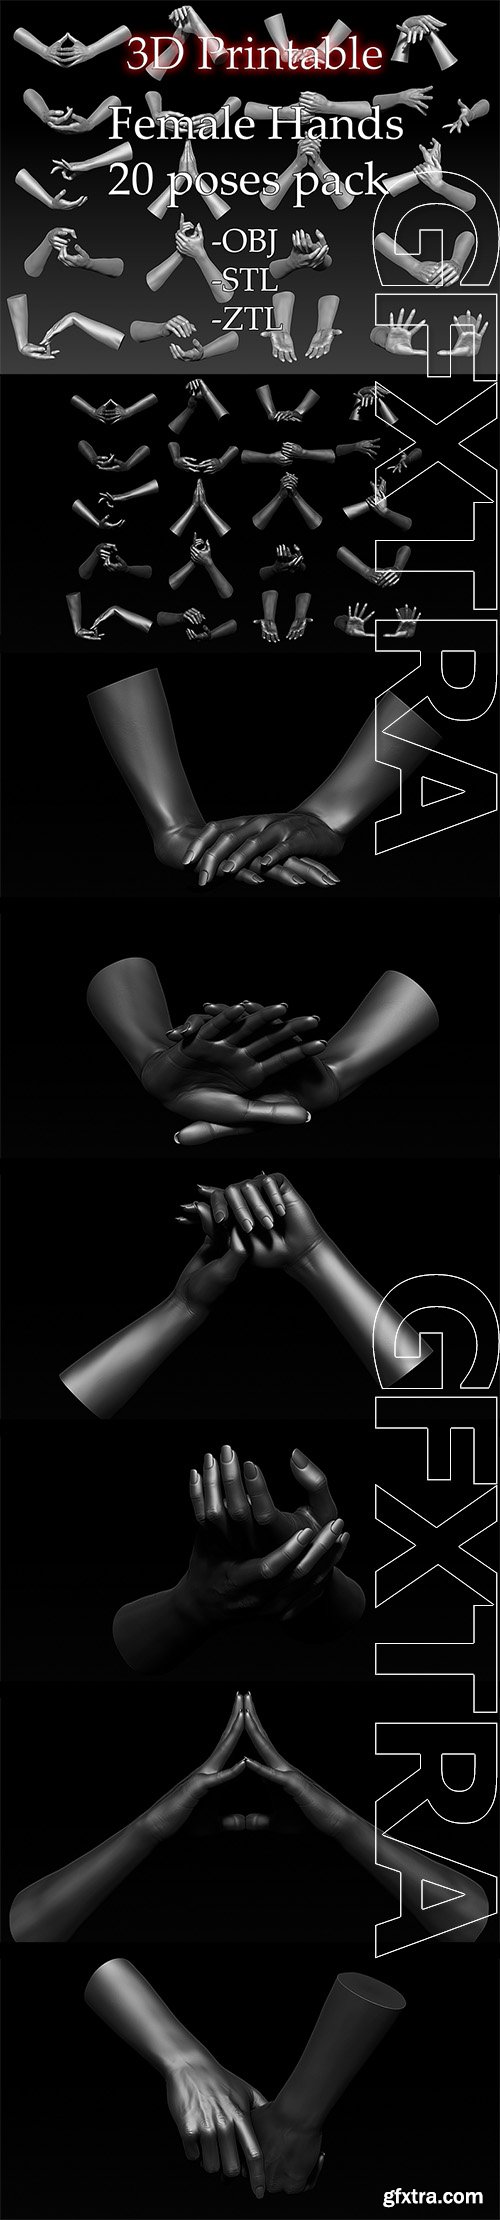 Cubebrush - 3d Printable Female Hands 20 poses pack